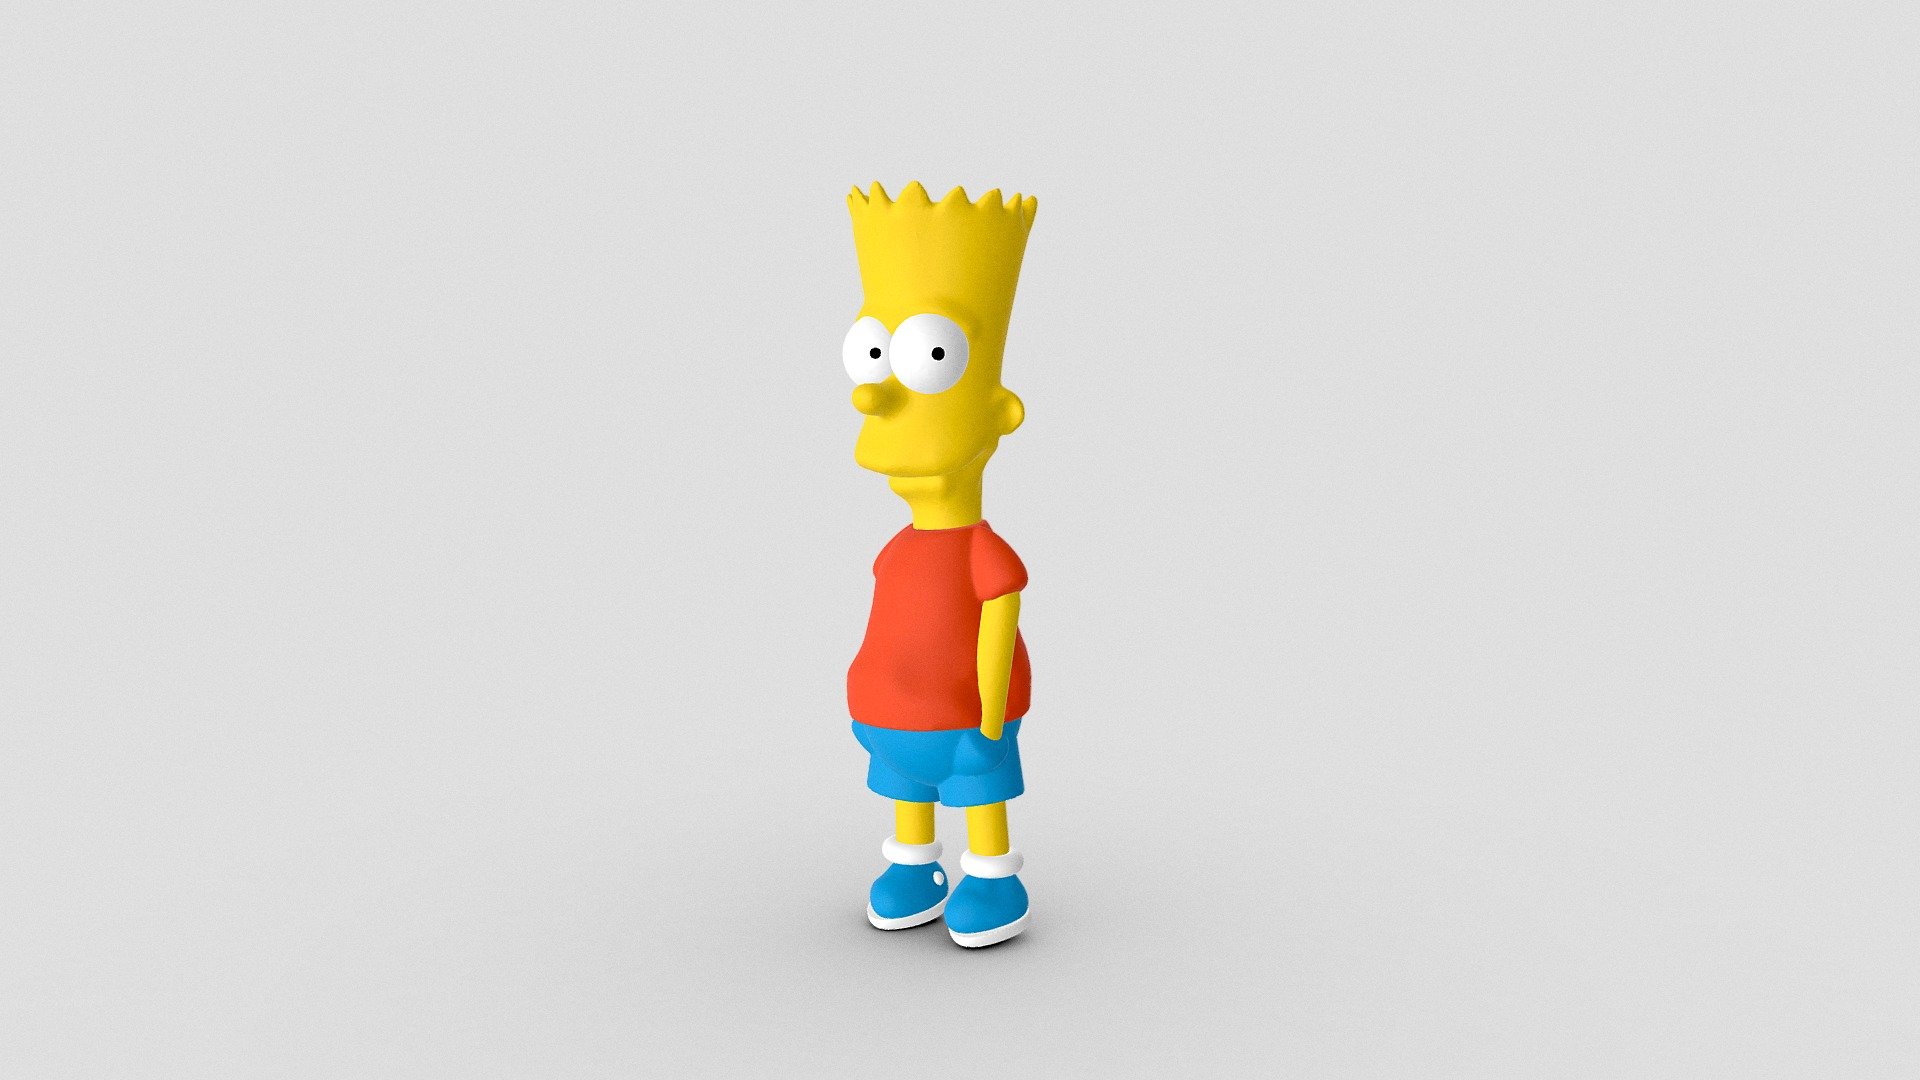 Bart Simpson sculpted in VR